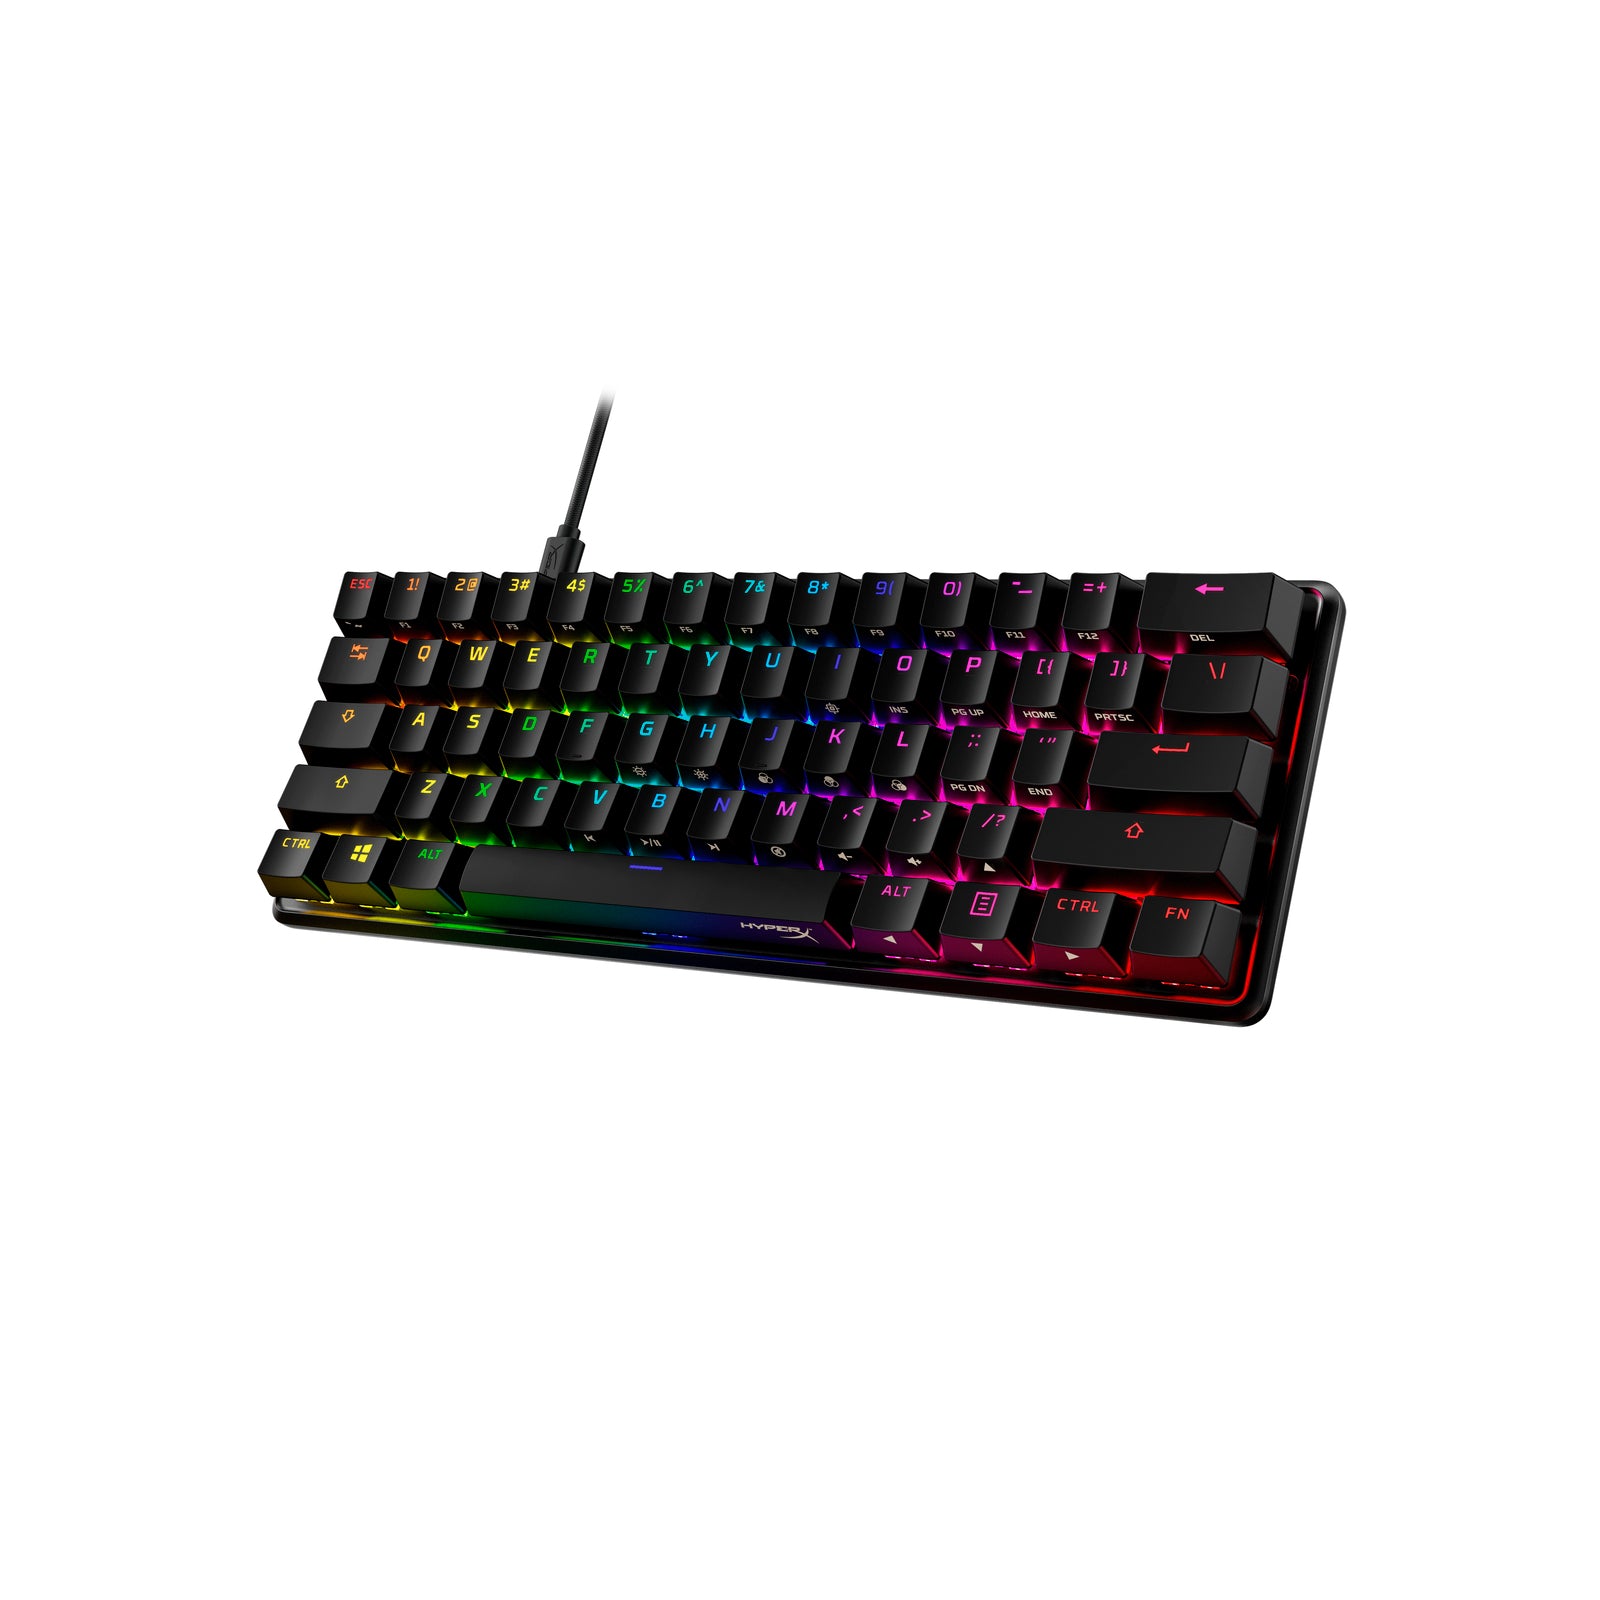 HyperX Alloy Origins 60 Gaming Mechanical Keyboard showing the front right side view featuring petite 60 form factor